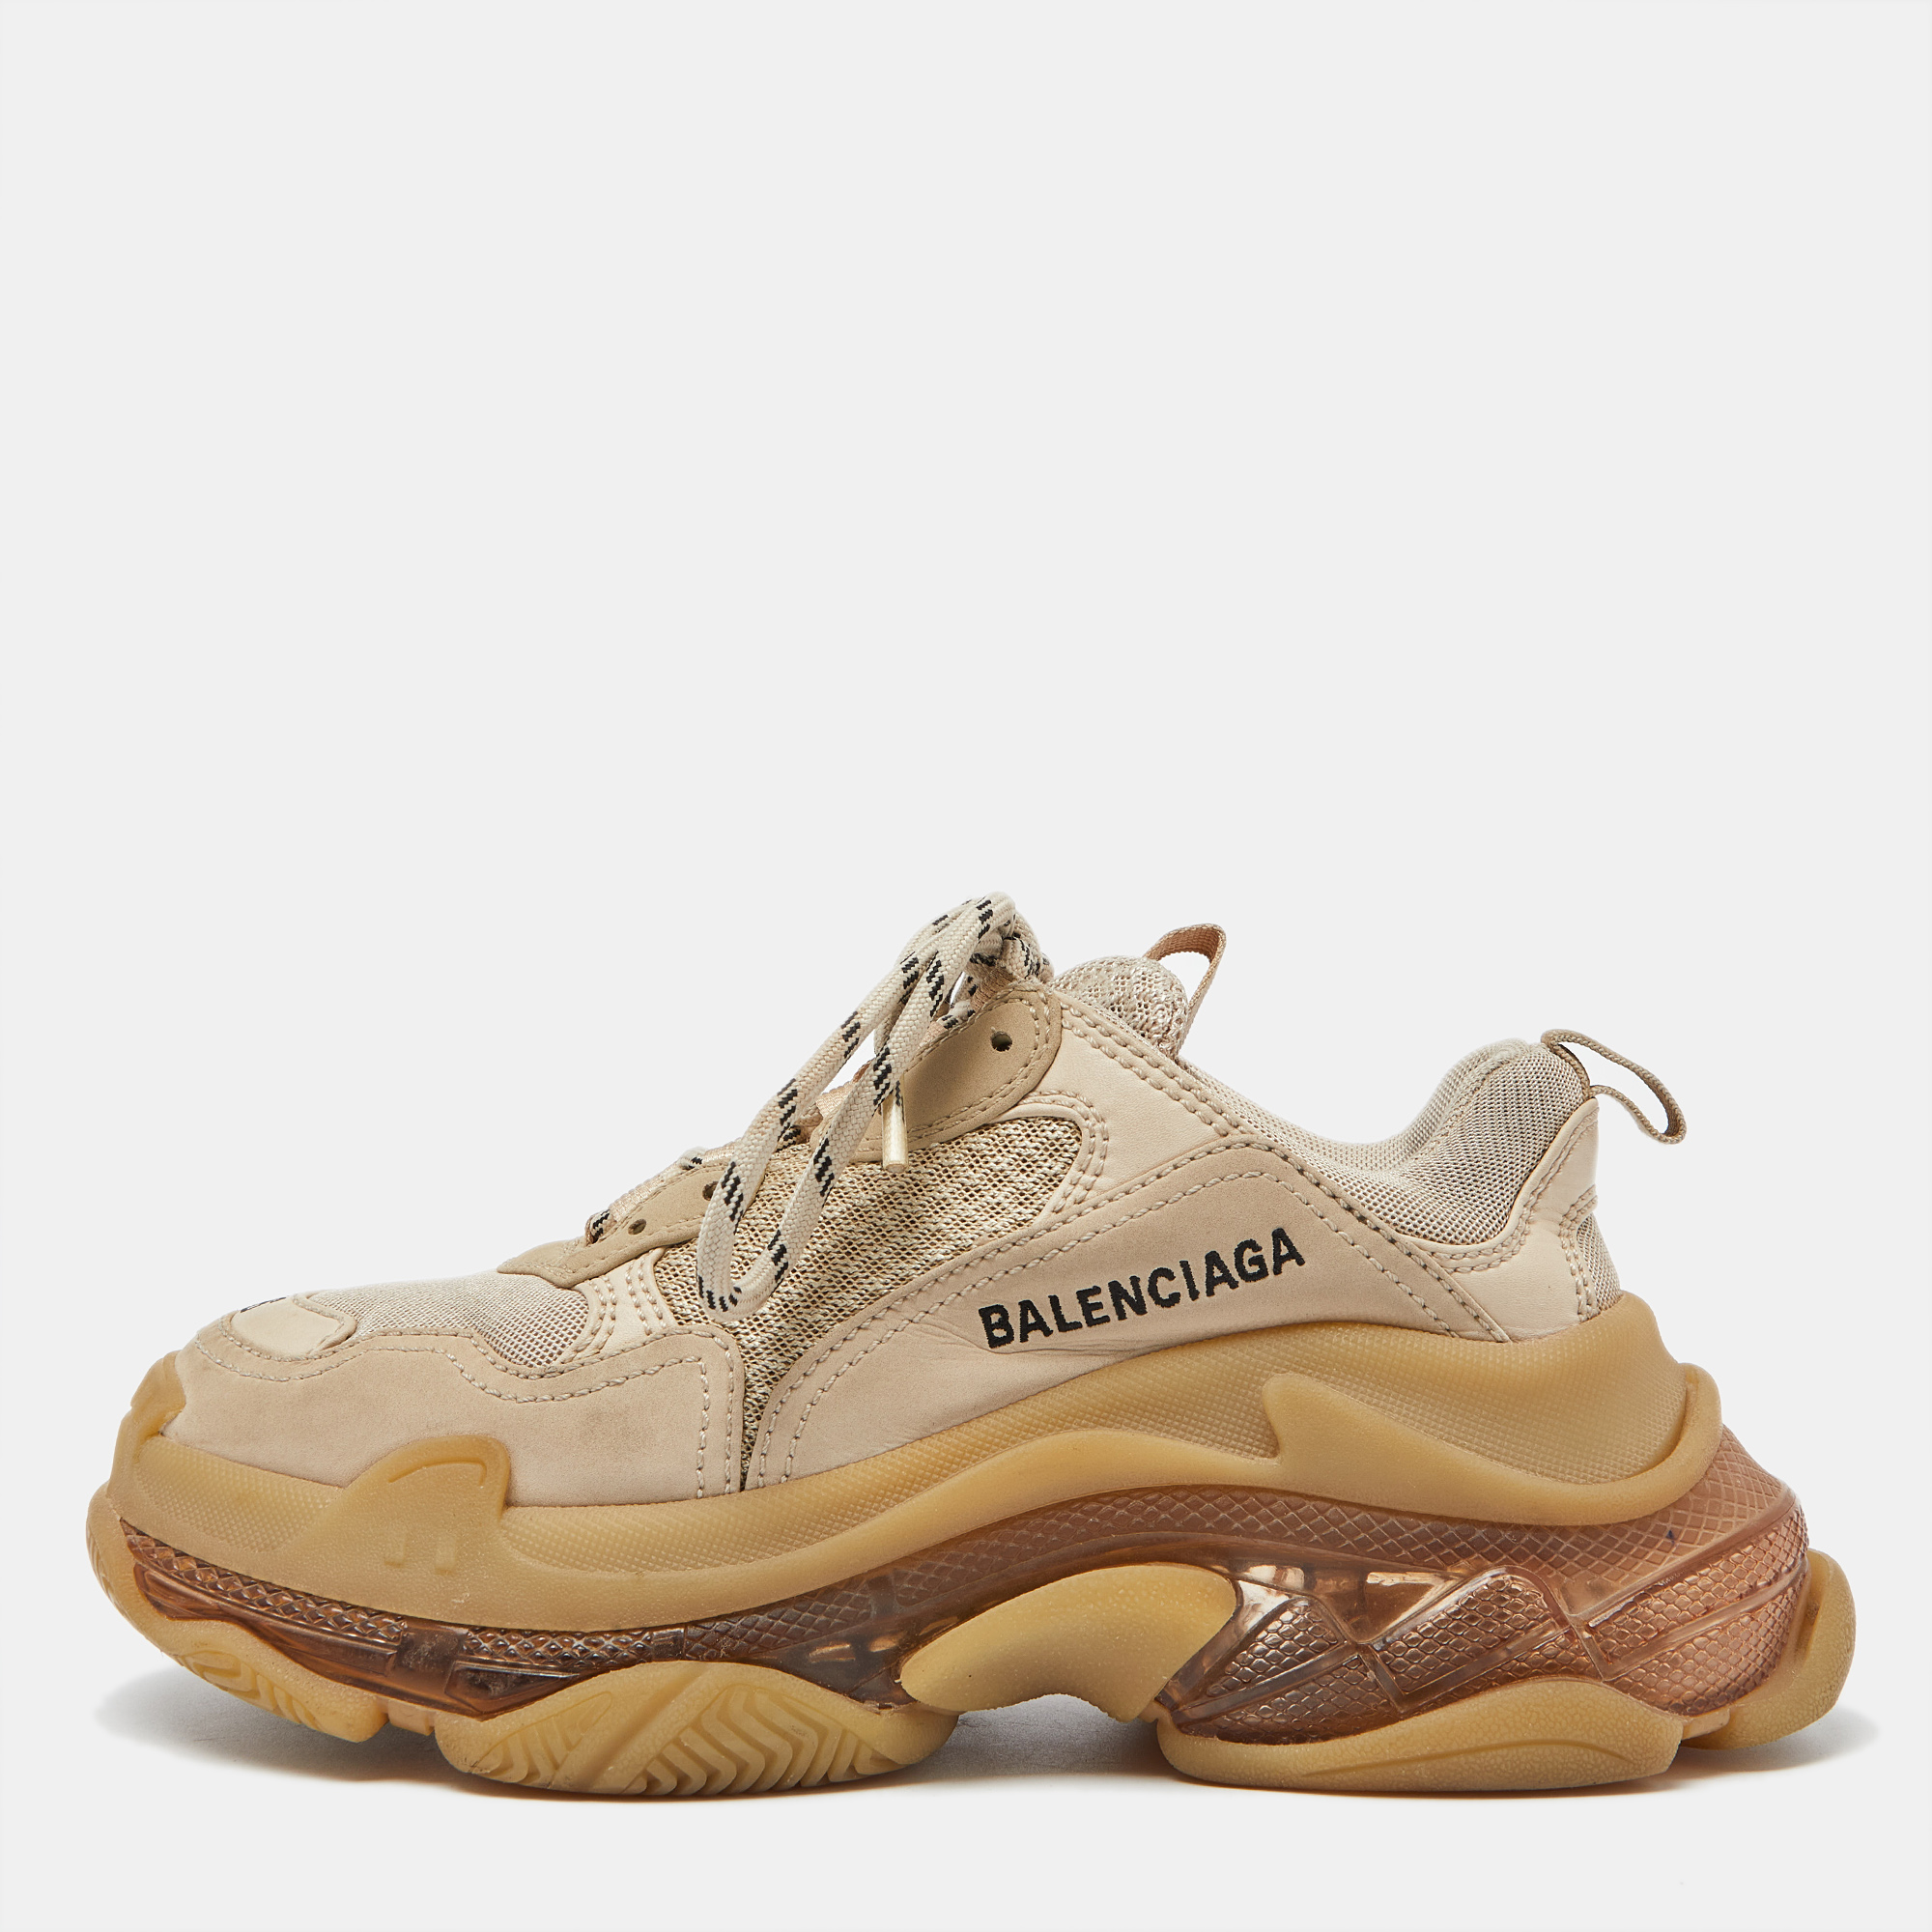 Upgrade your style with these Balenciaga Triple S sneakers. Meticulously designed for fashion and comfort theyre the ideal choice for a trendy and comfortable stride.